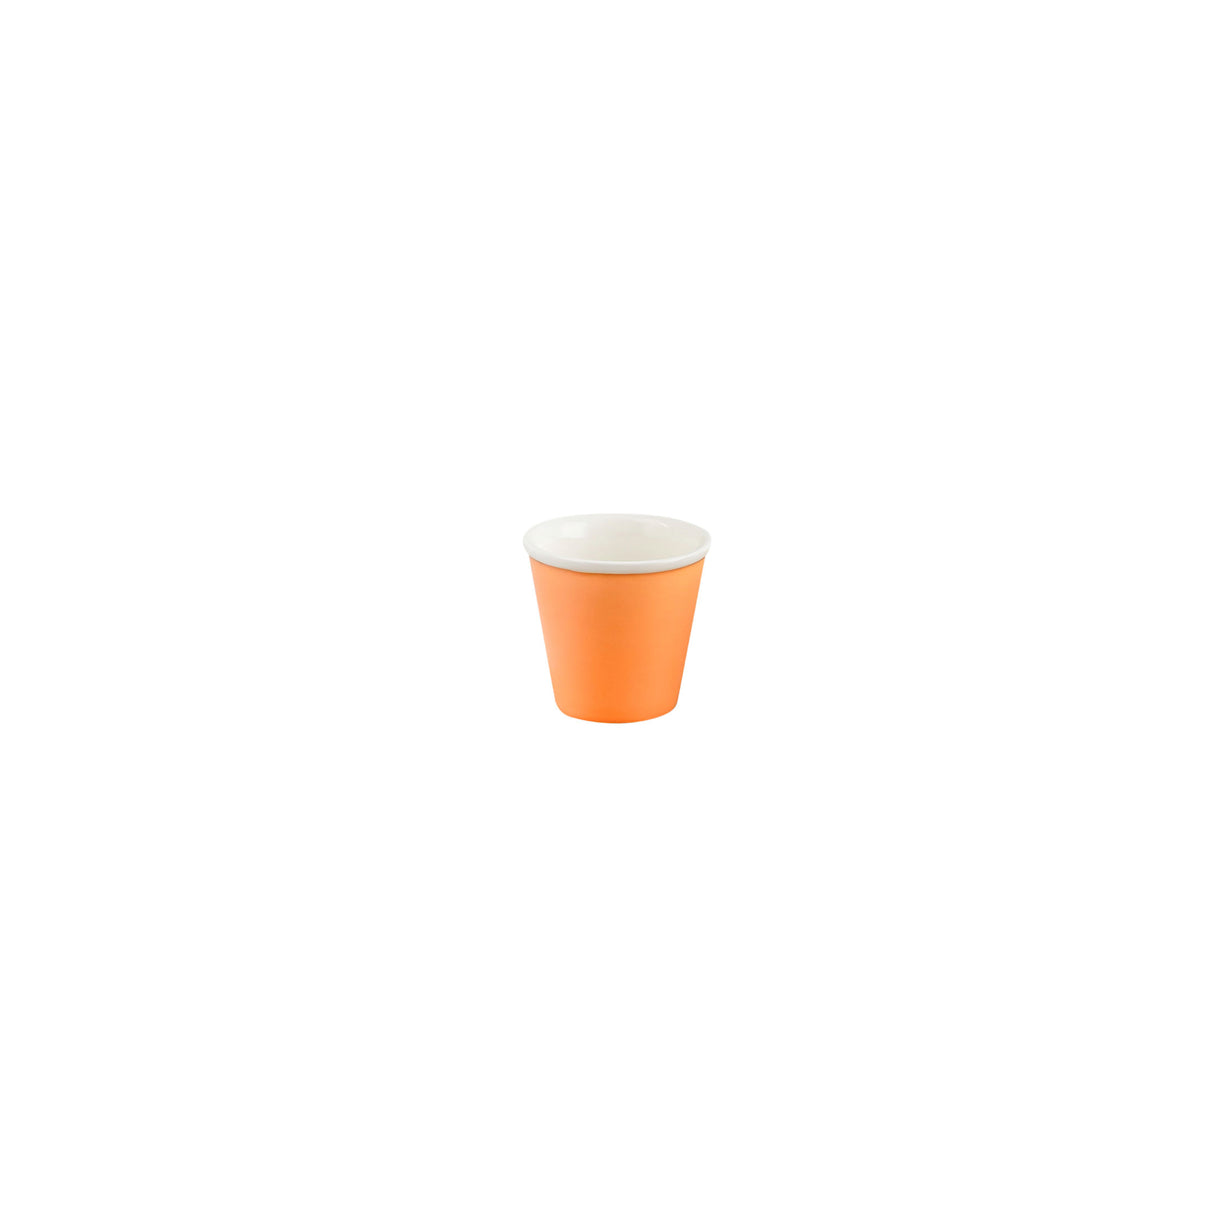 Espresso Cup - Apricot, 90ml: Pack of 6